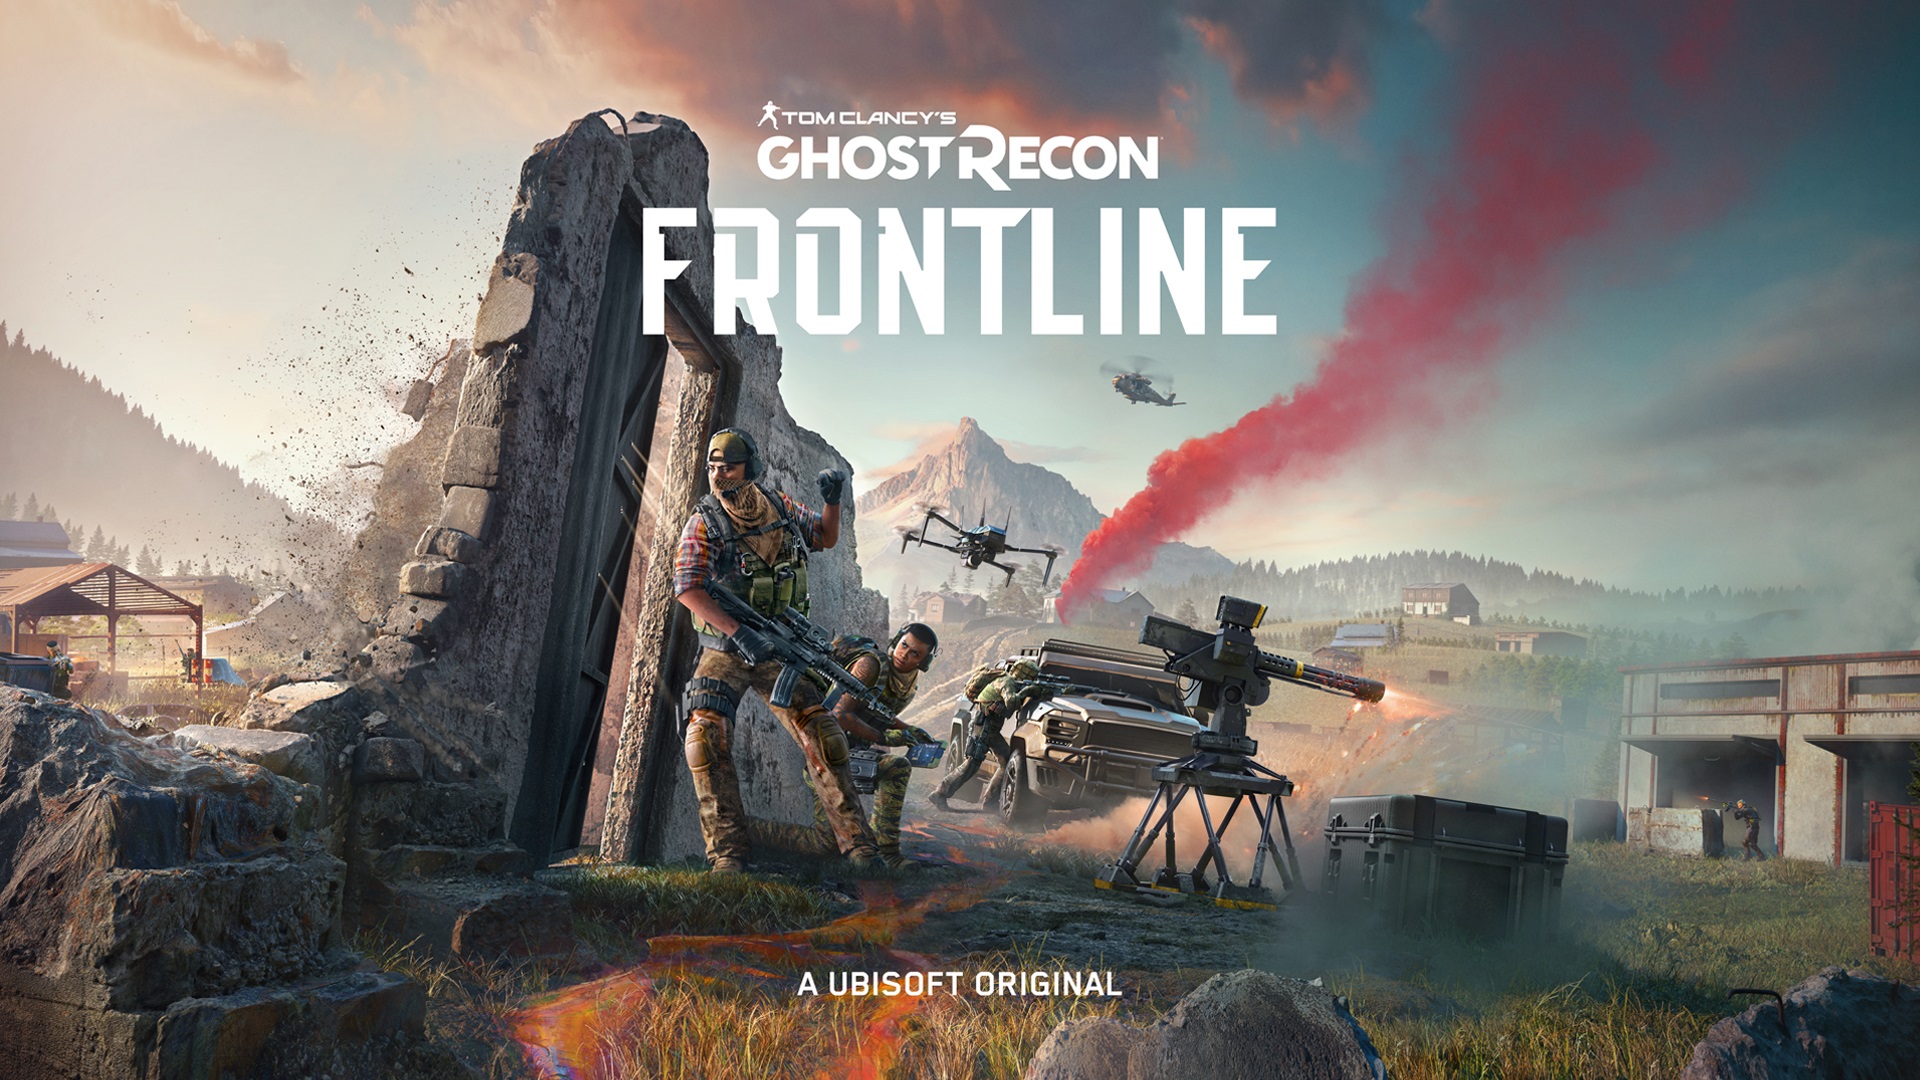 Ghost Recon Frontline is a Free-to-Play Battle Royale First Person Shooter